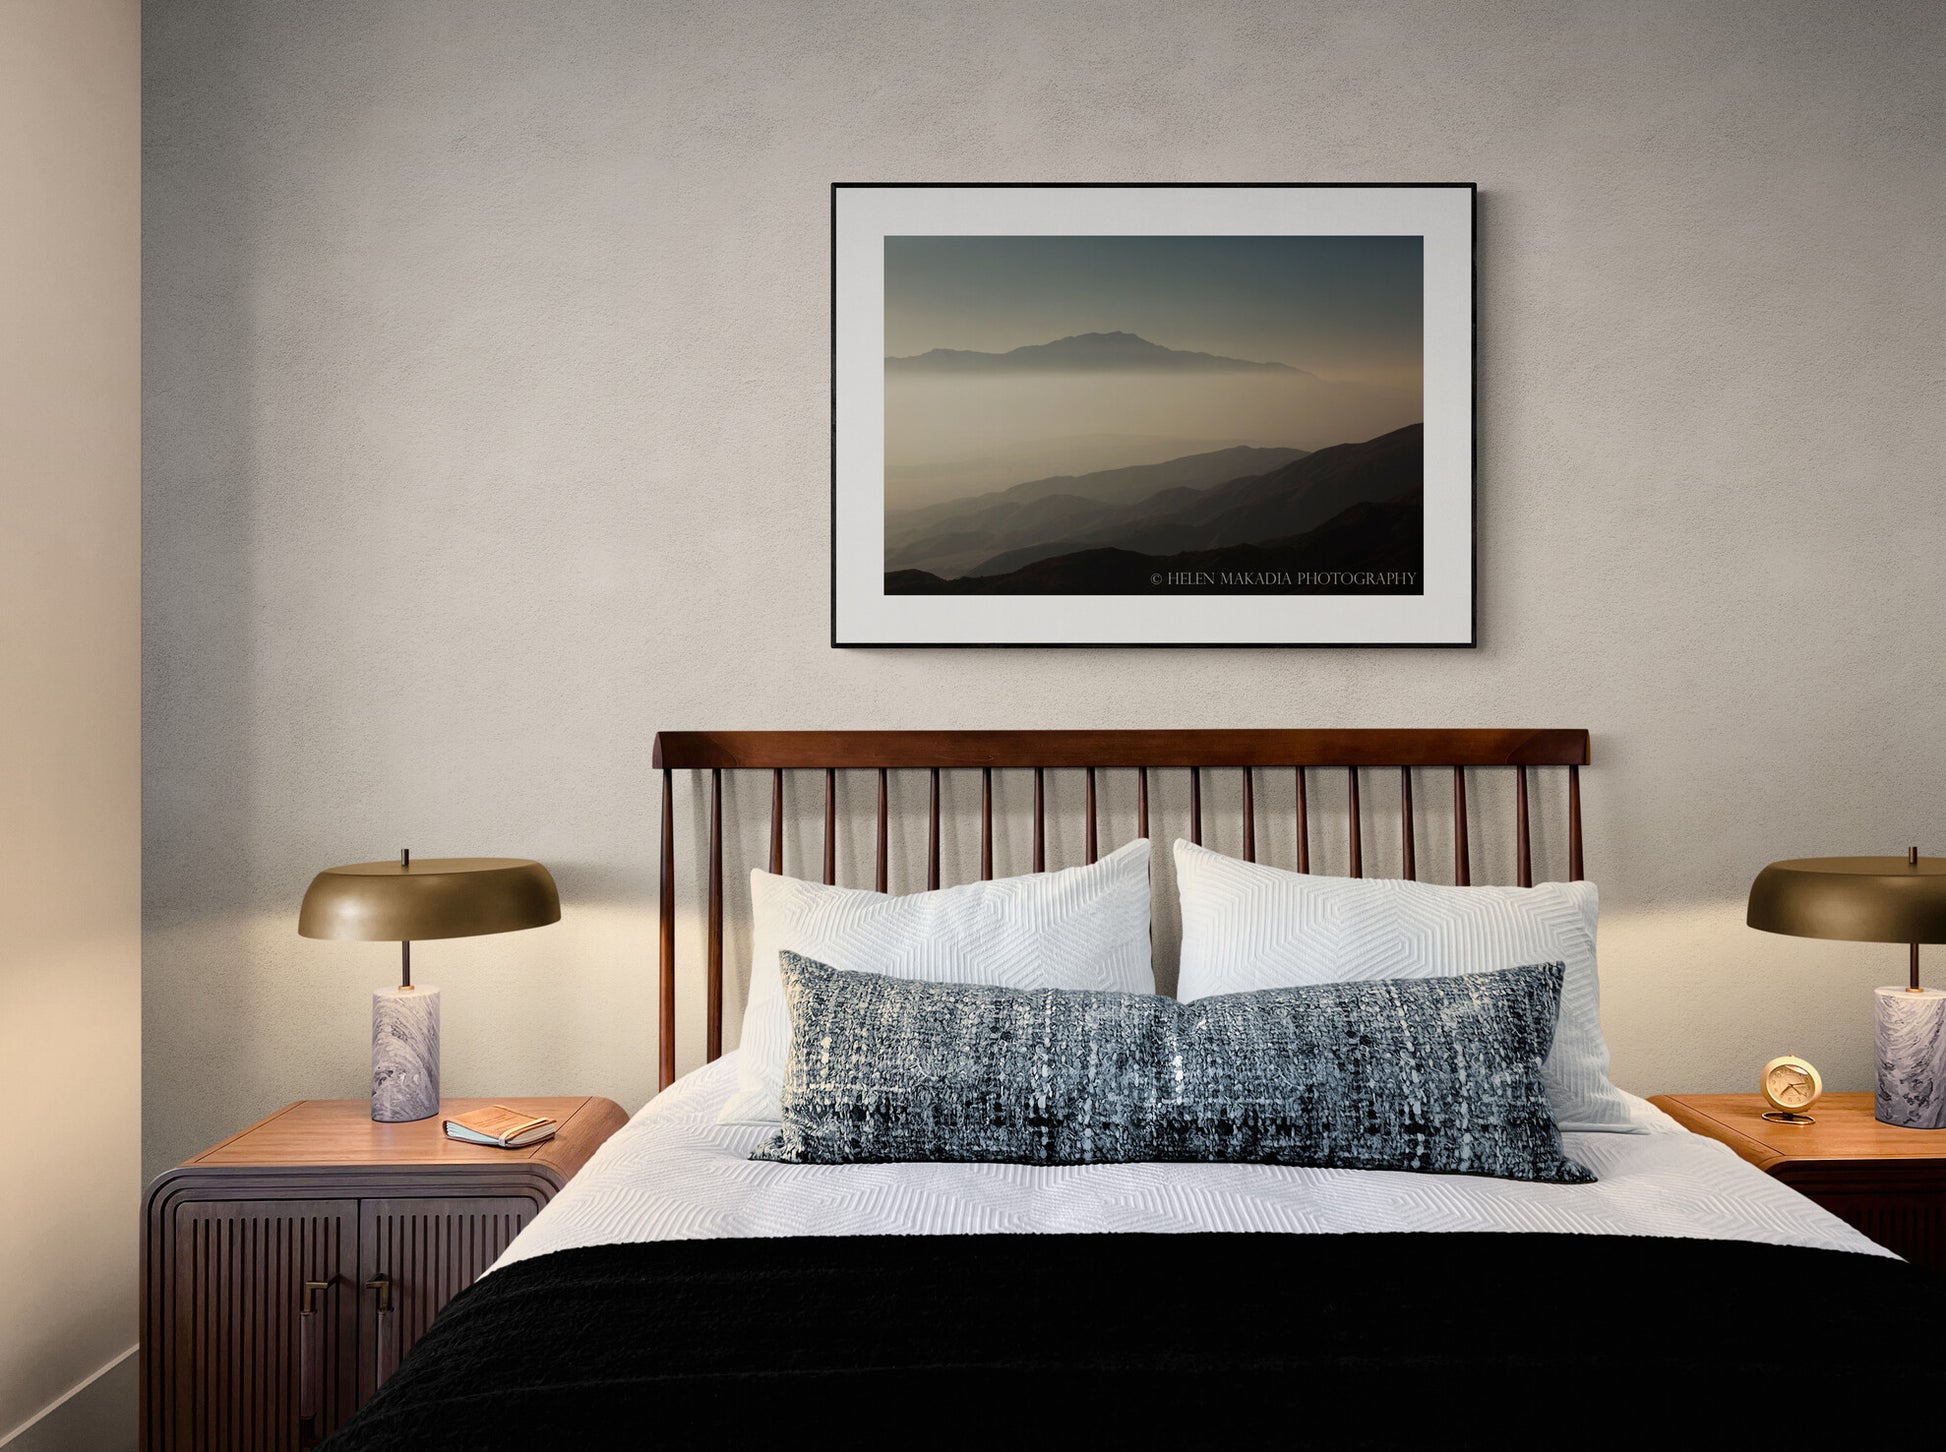 Neutral Tones of the California Mountains in a photograph print as bedroom wall art